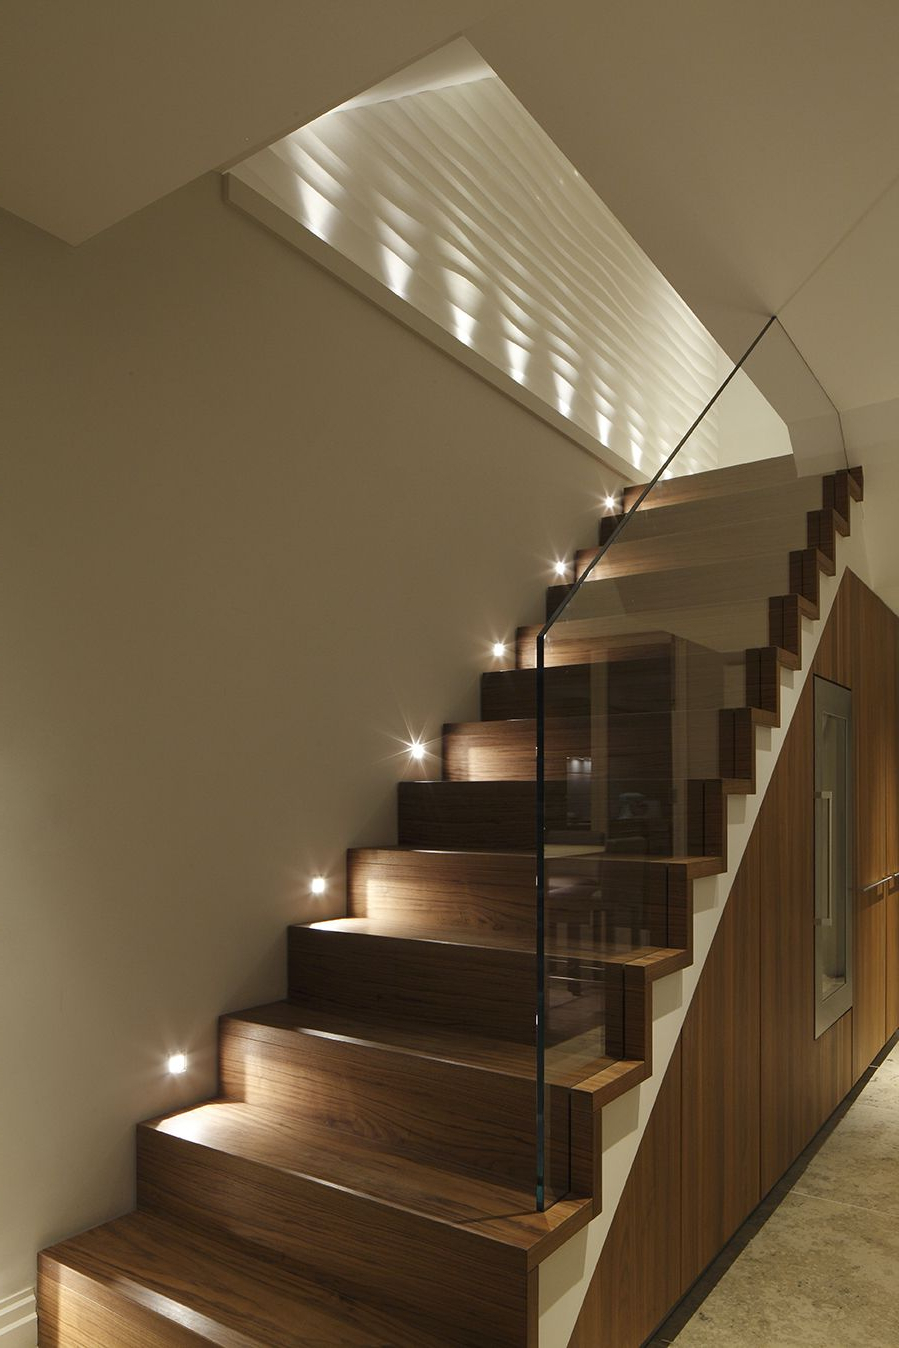 100 Project Ideas And Designs With Images Stairway Design Stairway Lighting Staircase Design